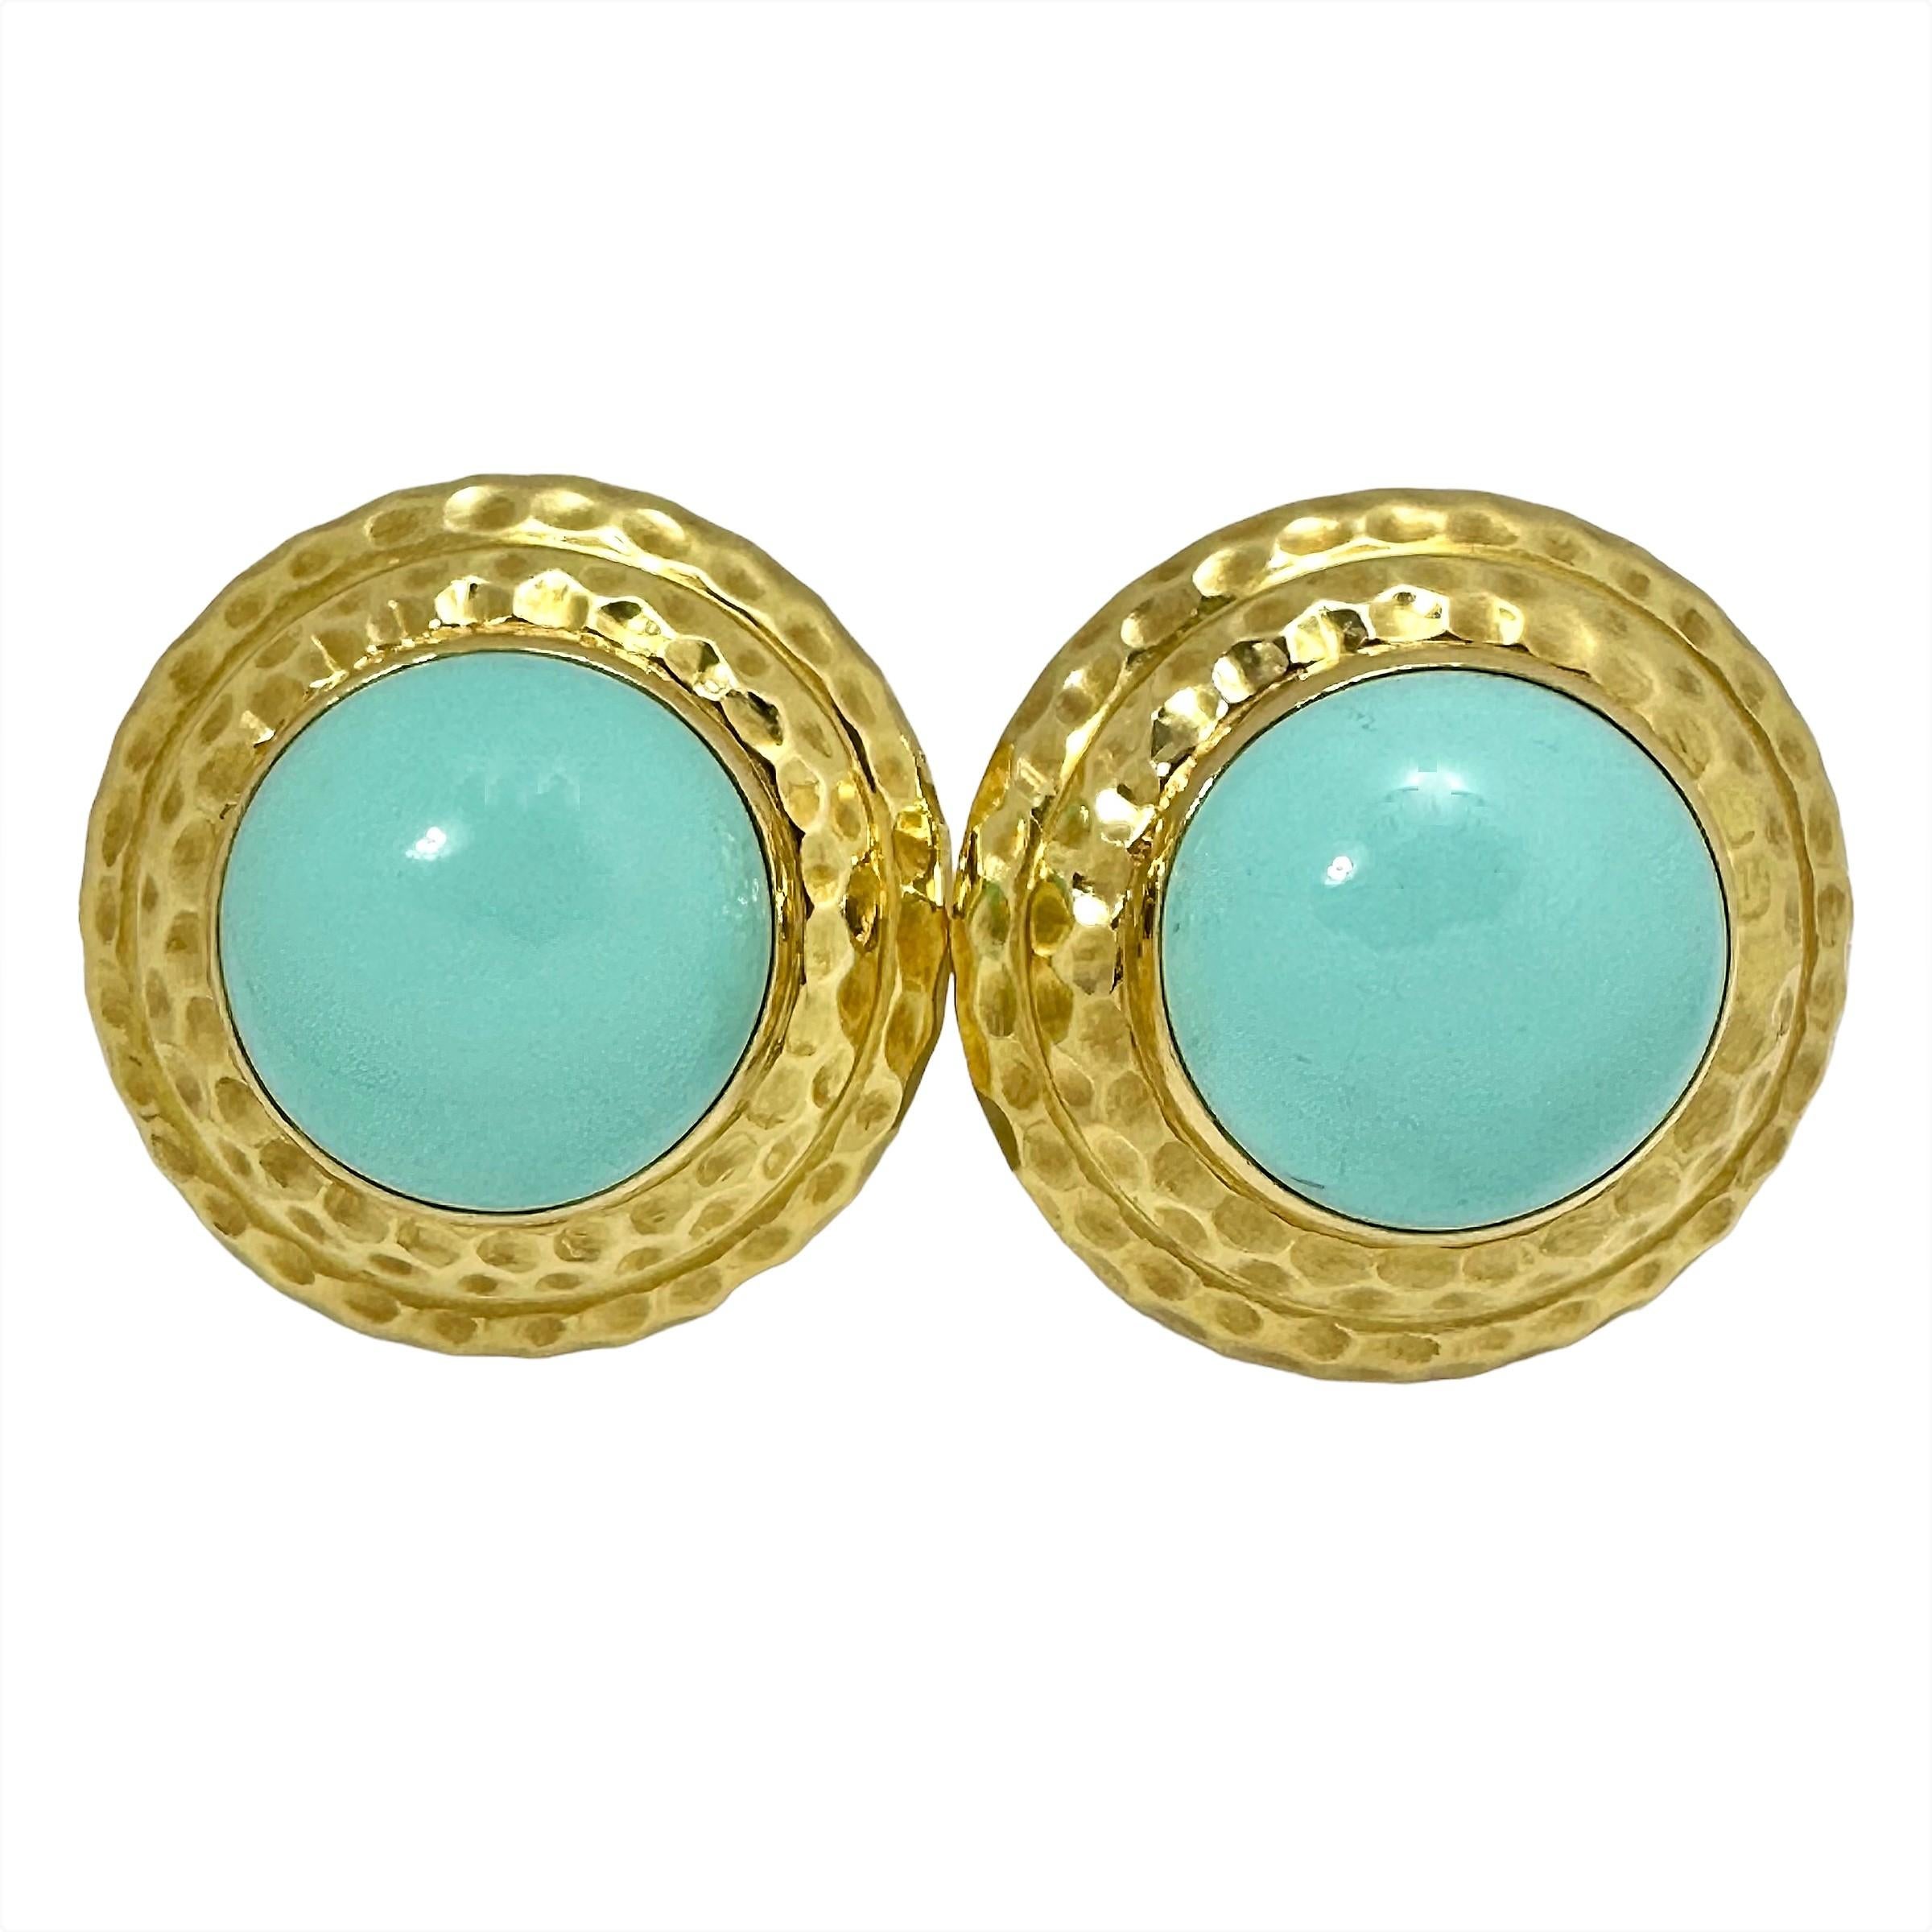 Made in America of Hammered finish 18K yellow gold with an 11/16 inch diameter turquoise cabochon in the center of each, these beauties make a strong impression. The high level of workmanship and materials, make them a pair to be admired. Measures 1